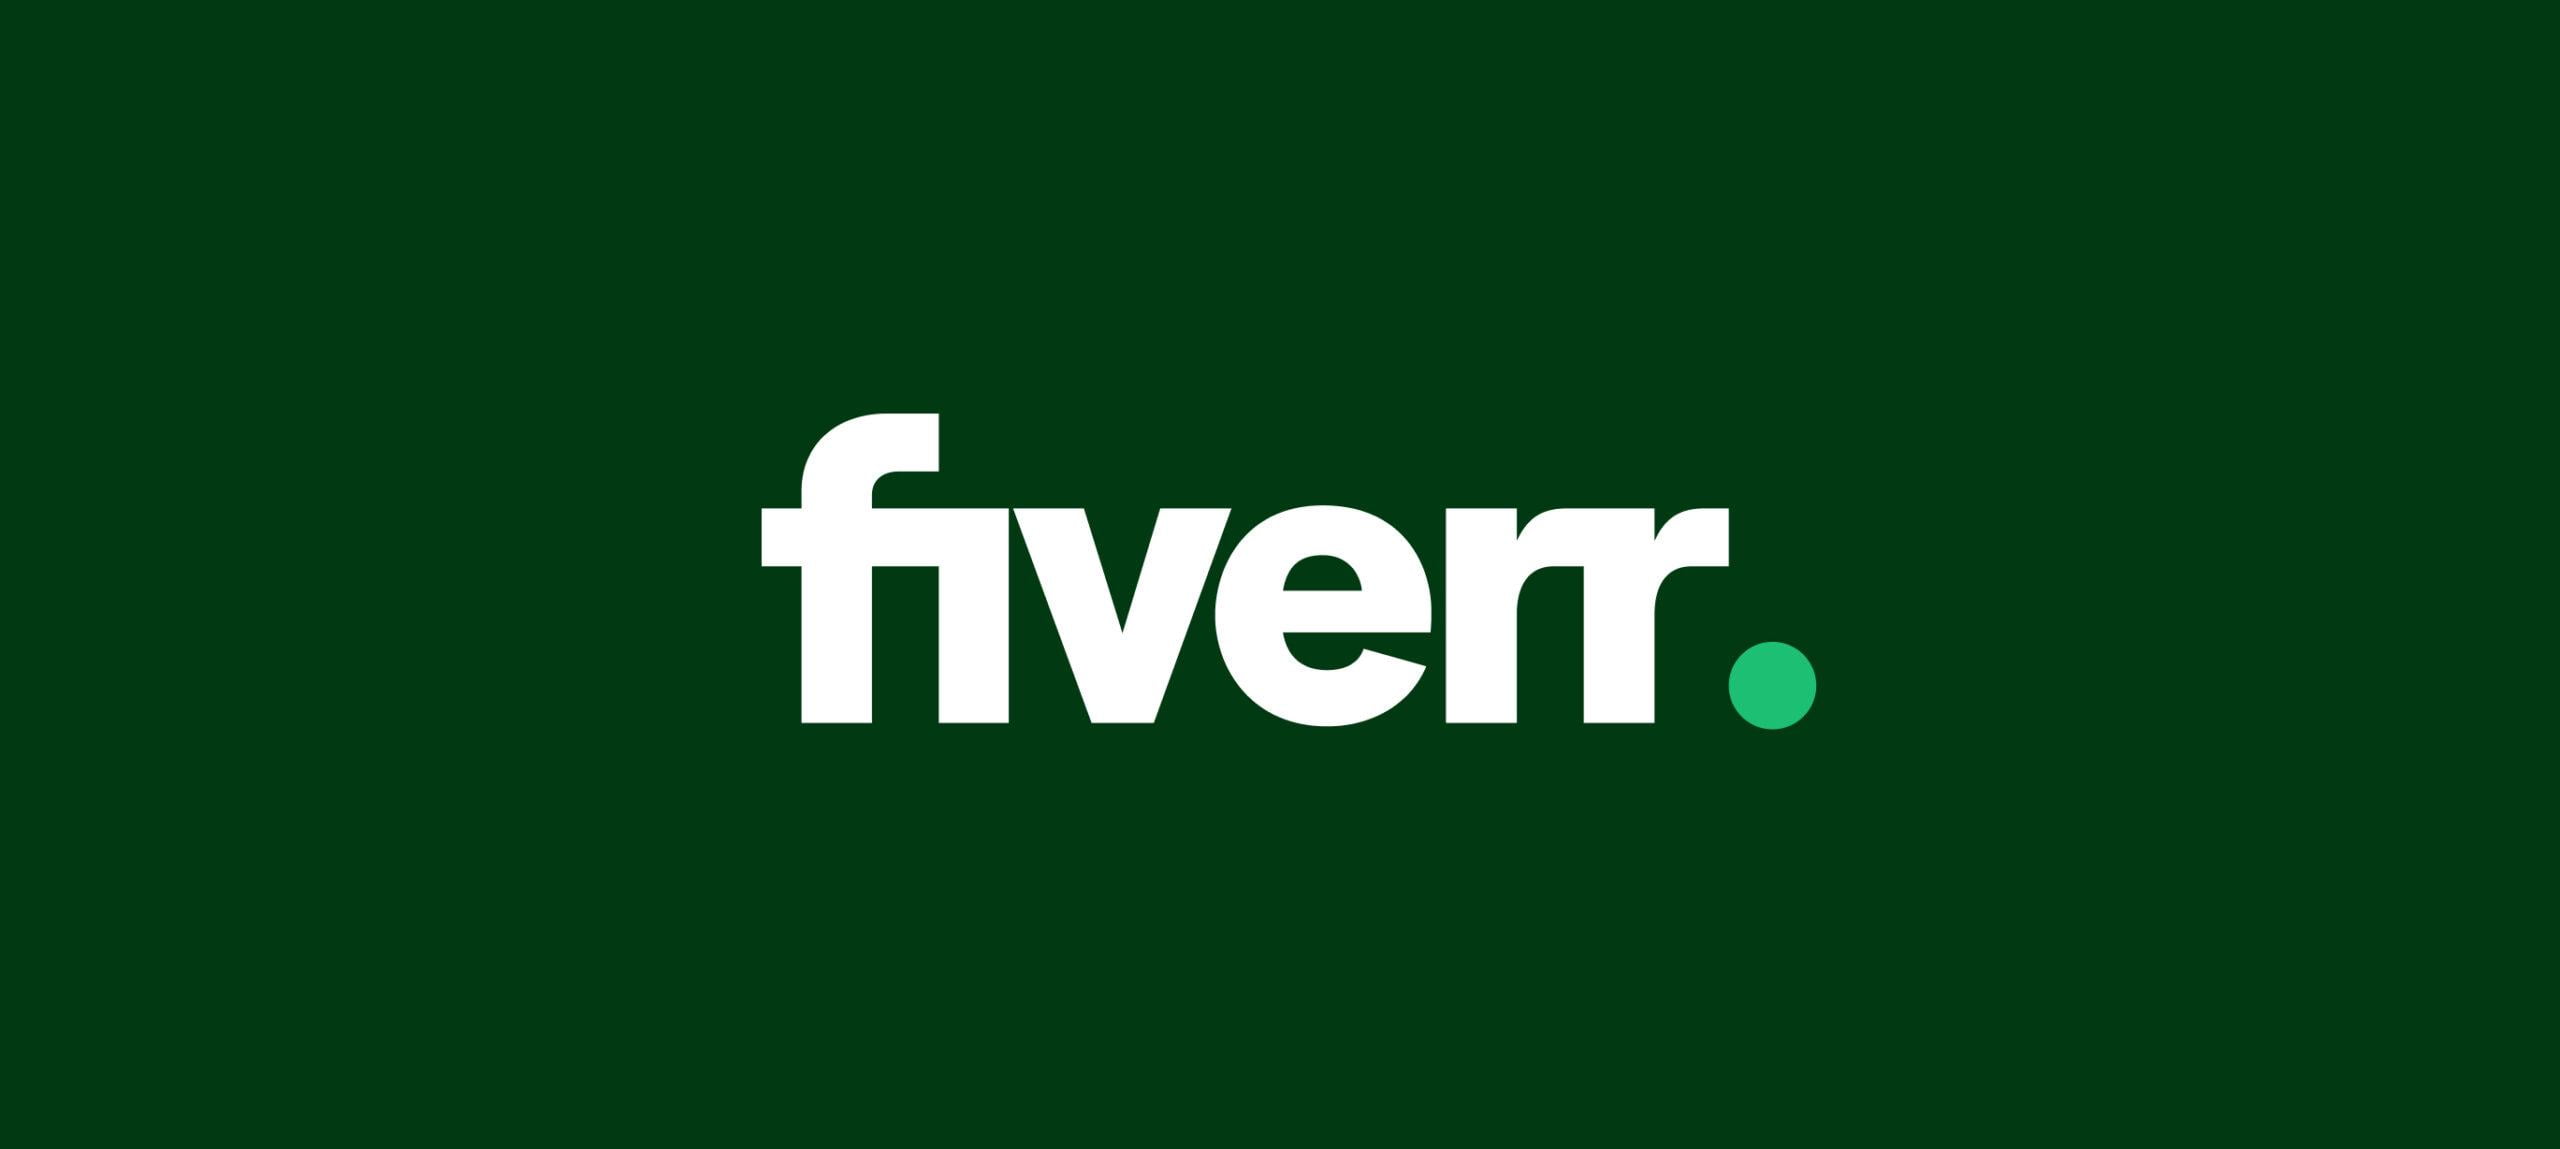 What Is Fiverr | How Does Fiverr Work in 2022?